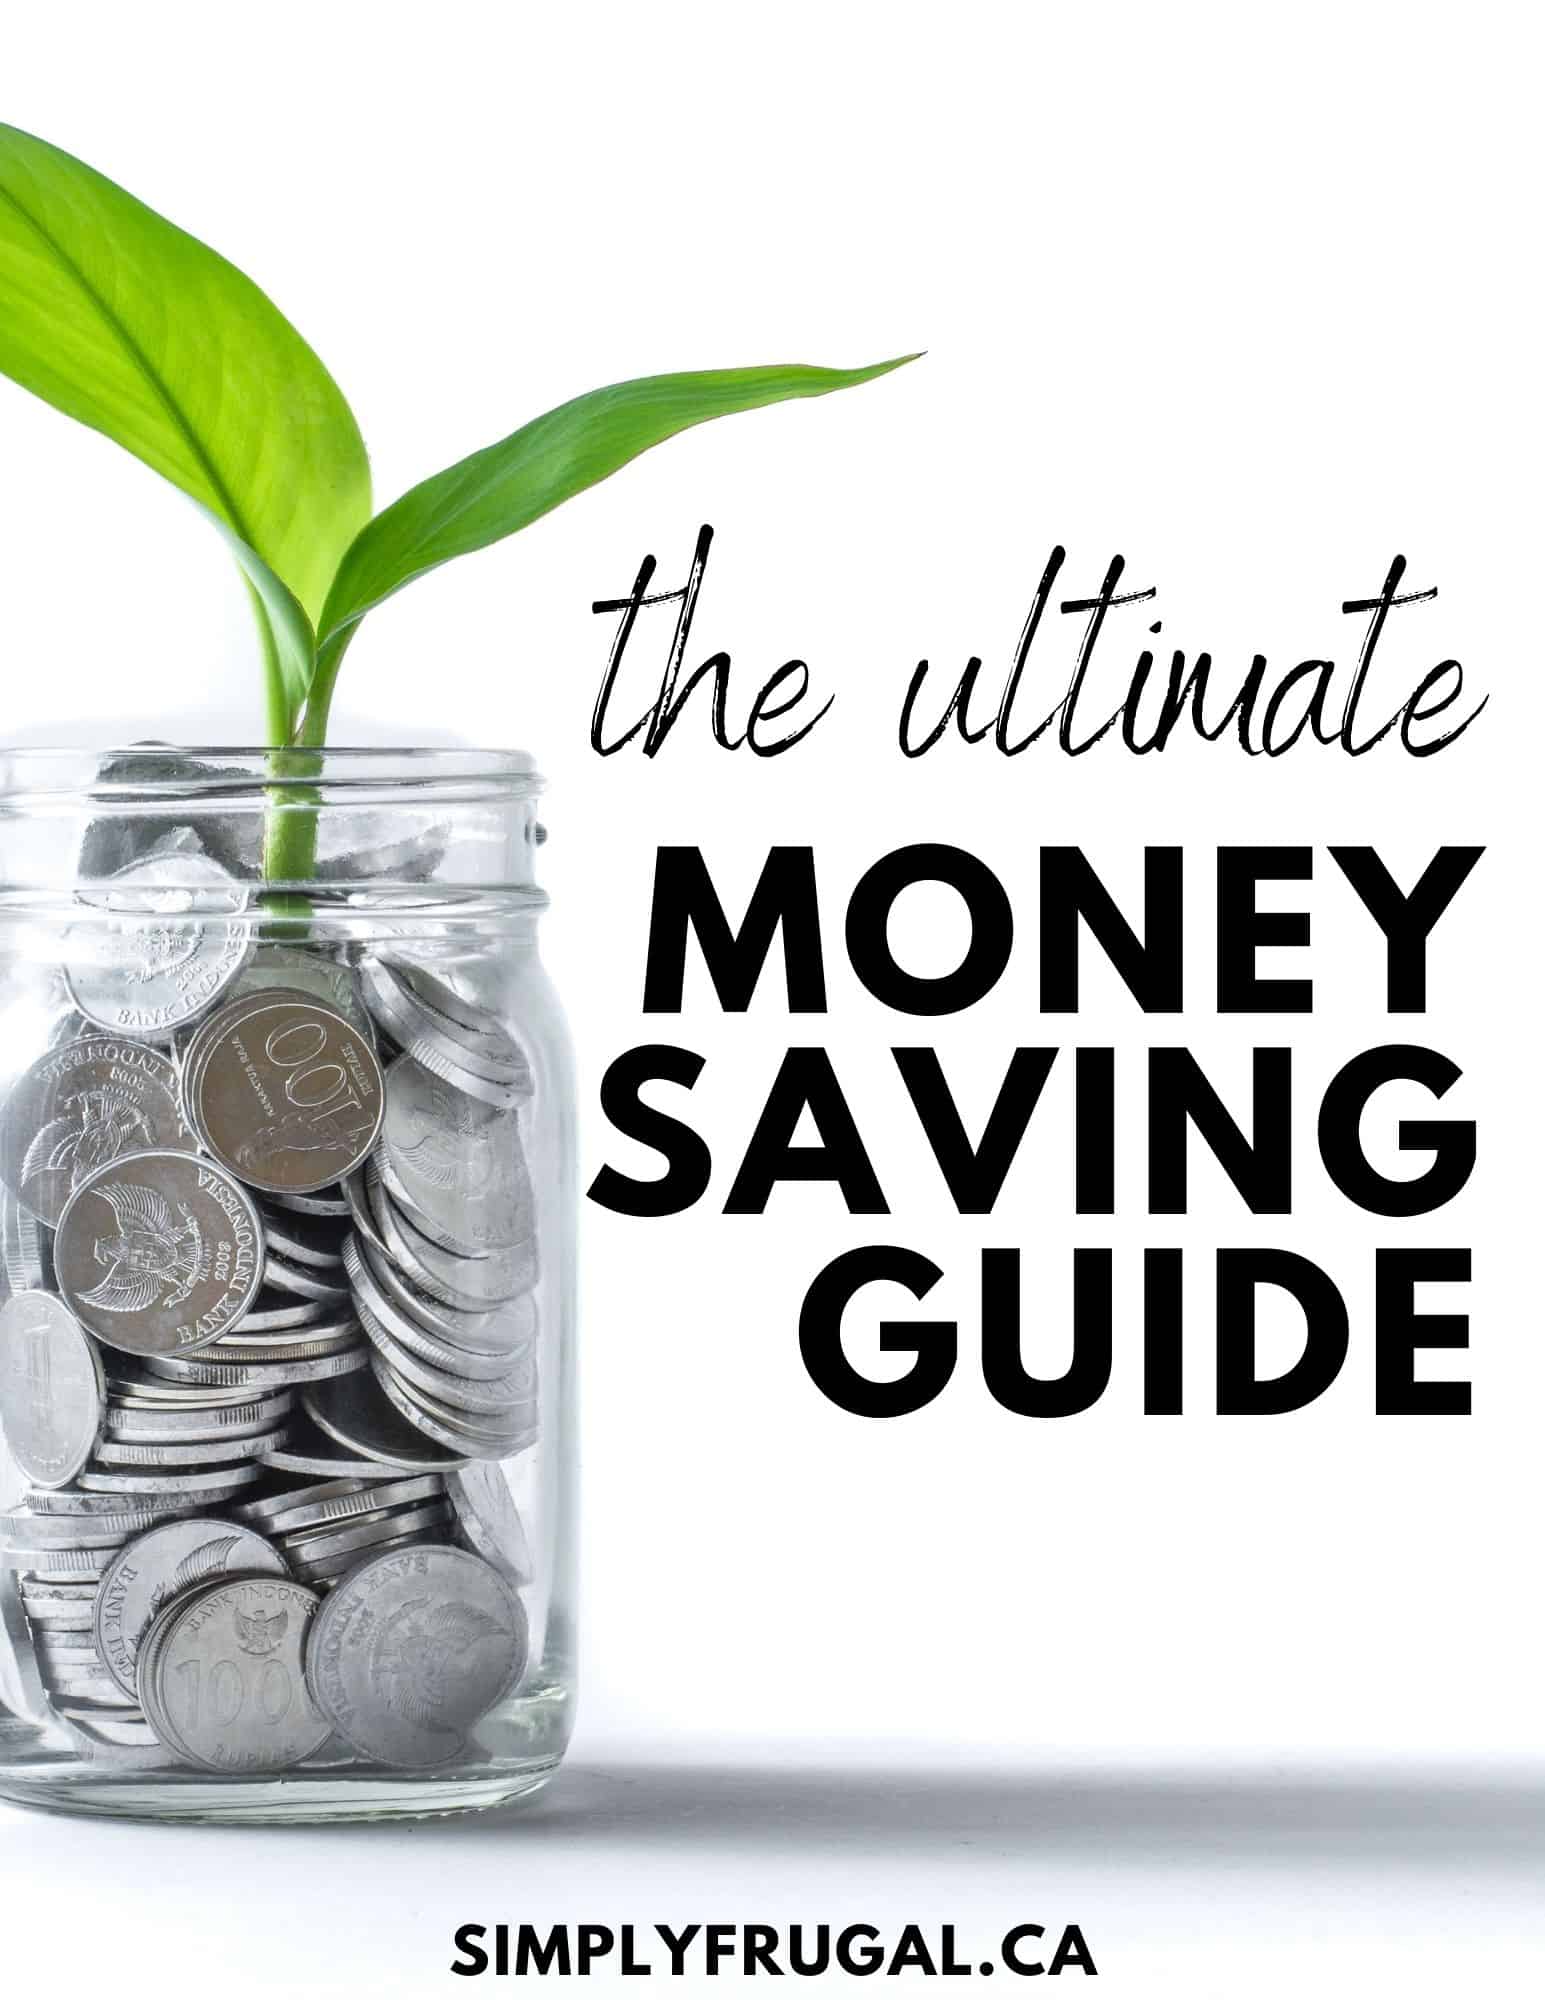 the Ultimate money saving guide